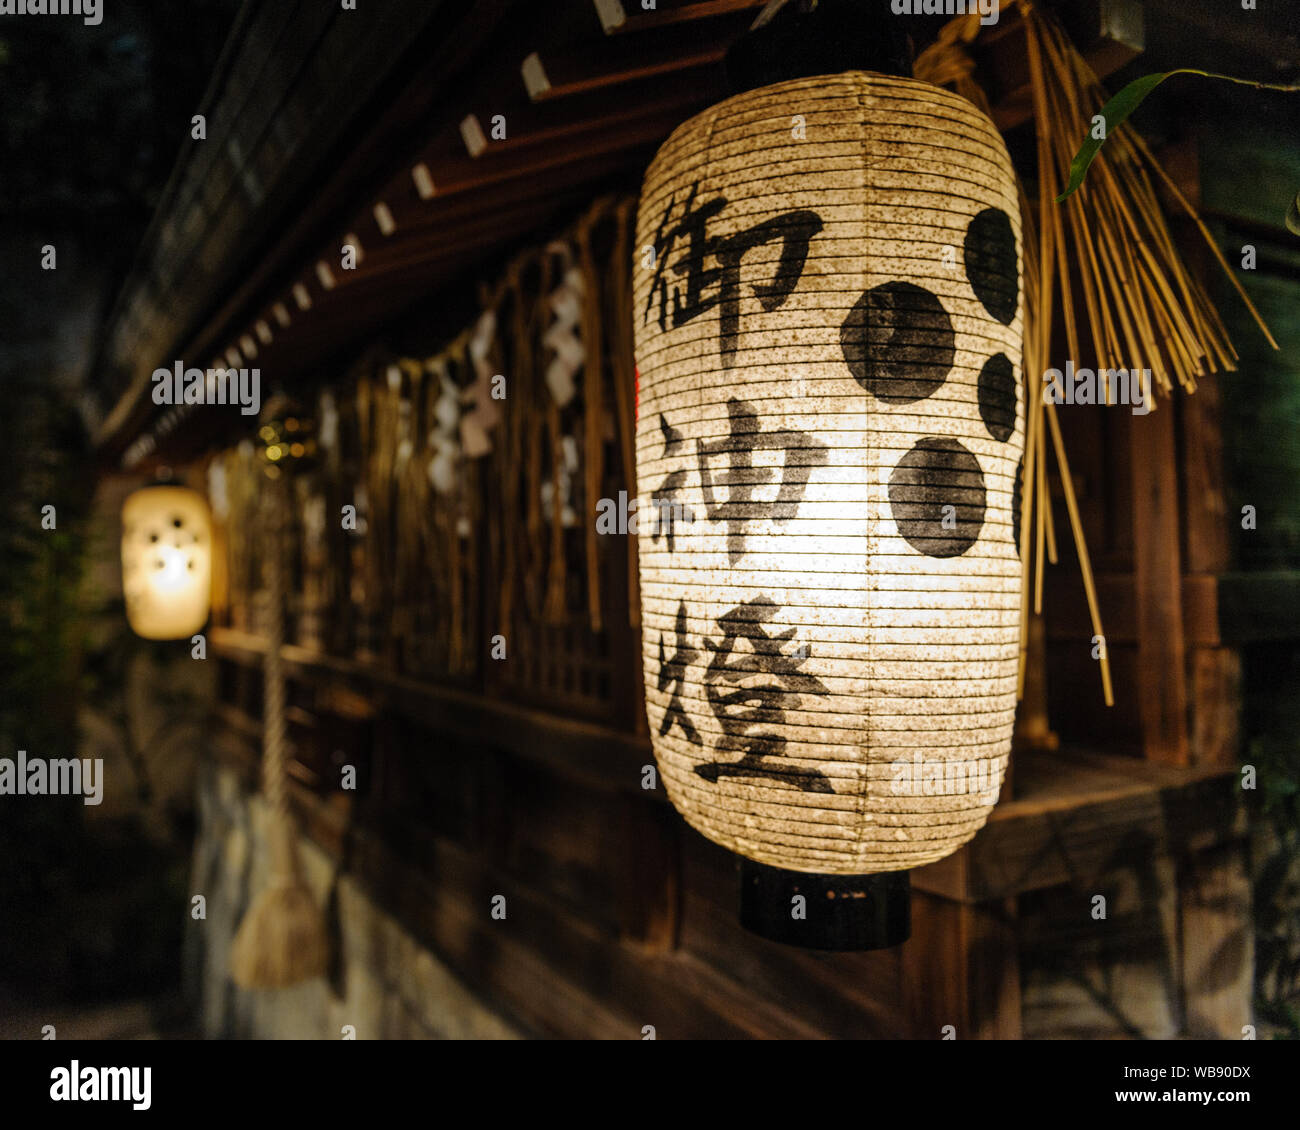 Traditional japanese Lanterns made from paper reavealing in abstract pattern with handwritten japanese Kanji characters, Kyoto Japan November 2018 Stock Photo